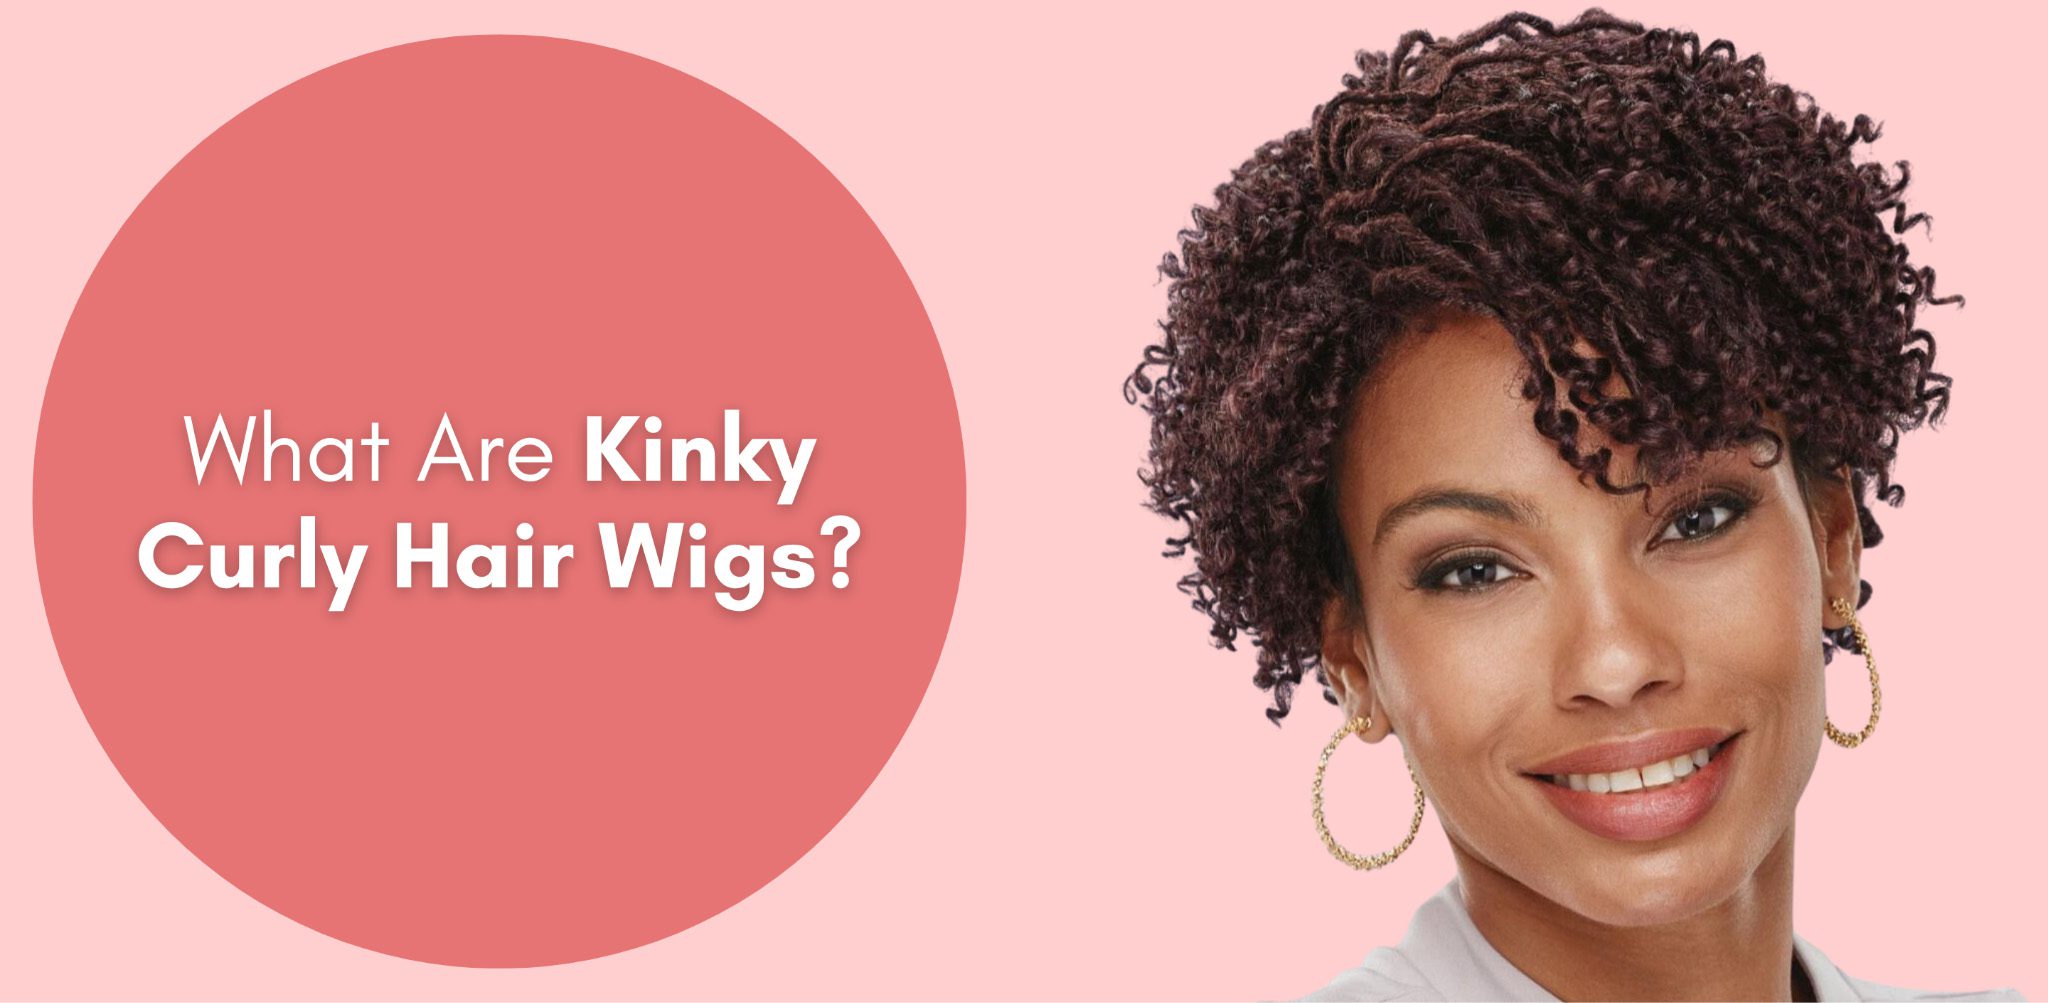 What Are Kinky Curly Hair Wigs?